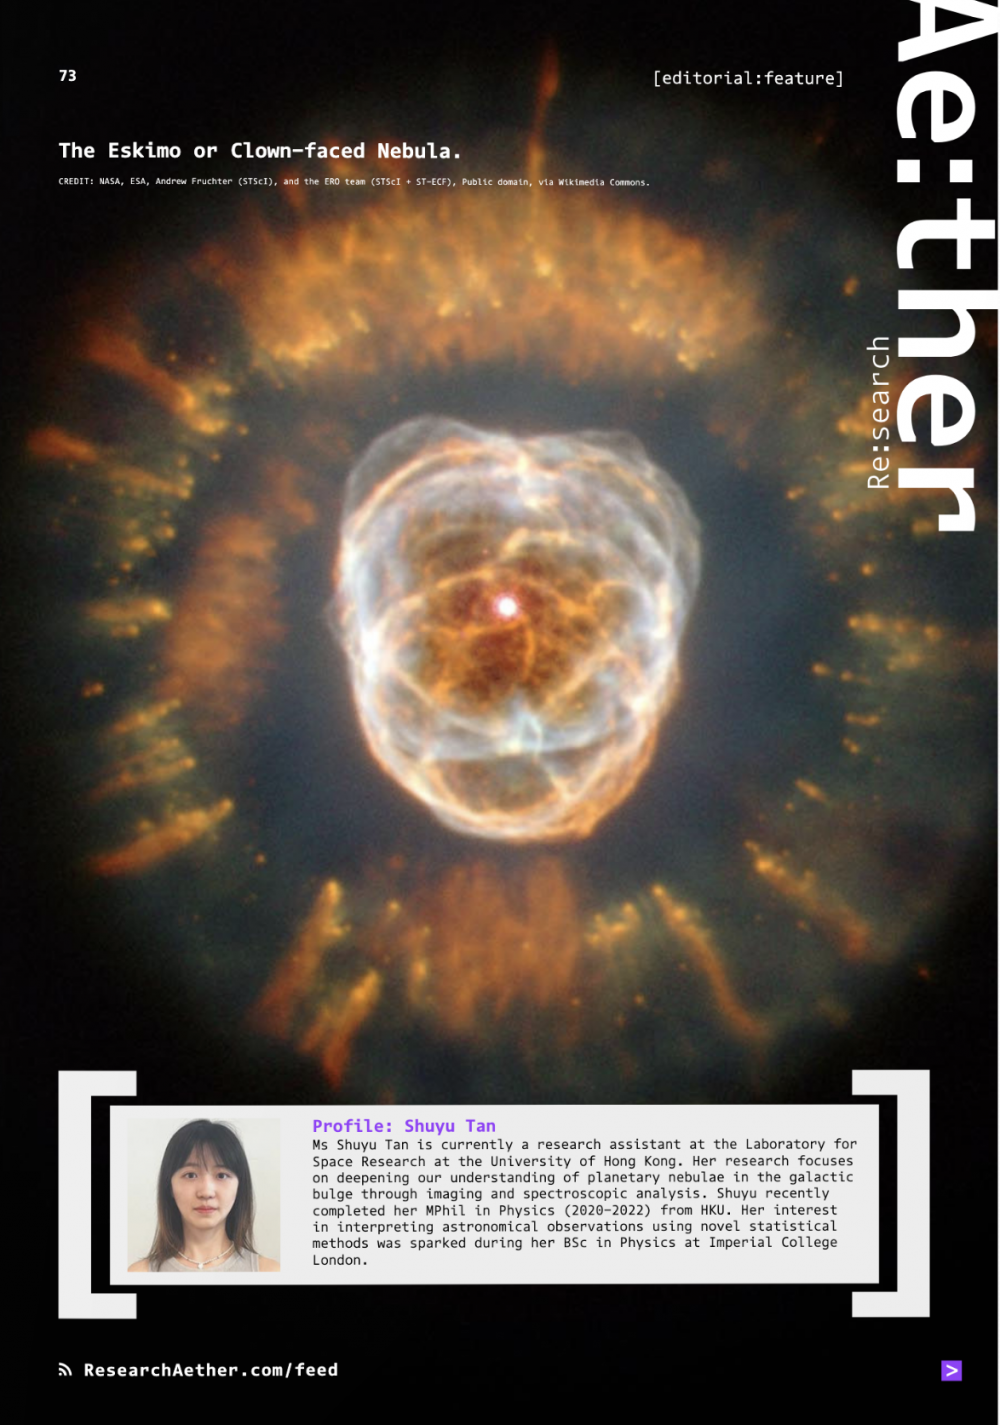 Ms. Shuyu Tan and her ApJ research was mentioned on the science magazine “Research Aether”